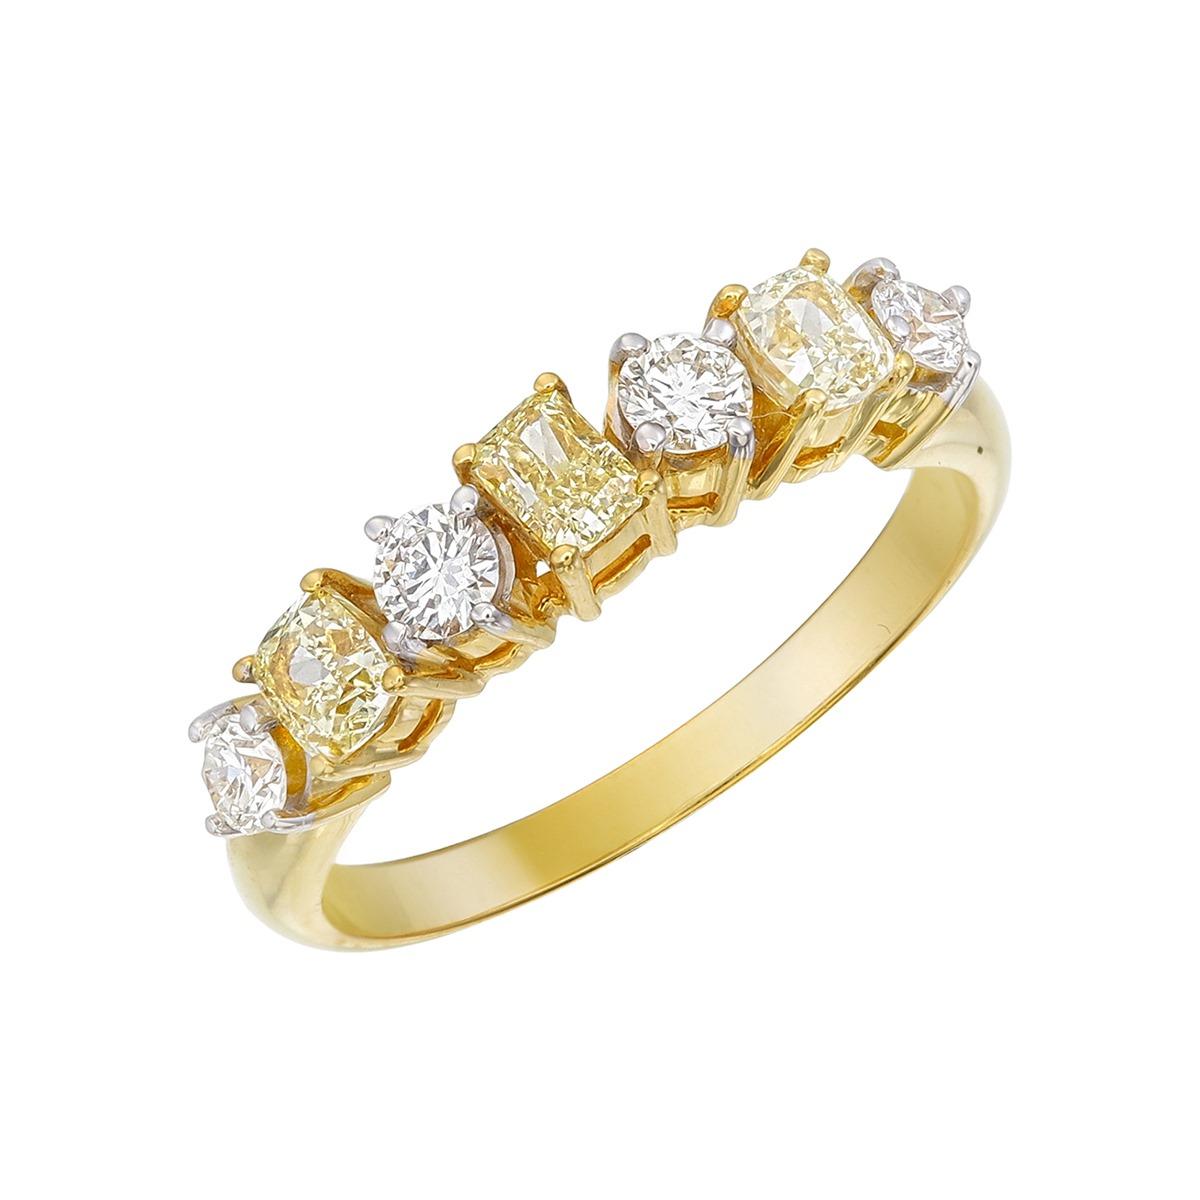 **100% NATURAL FANCY COLOUR DIAMOND JEWELRY**

✪ Jewelry Details ✪

Radiant Yellow Diamonds - 0.21 Carat

Cushion Yellow Diamonds - 0.46 Carat

Round White Diamonds - 0.33 Carat

♦ GROSS WEIGHT: 2.93 grams

➛ Metal Type: 18k Gold
➛ Jewelry Type: